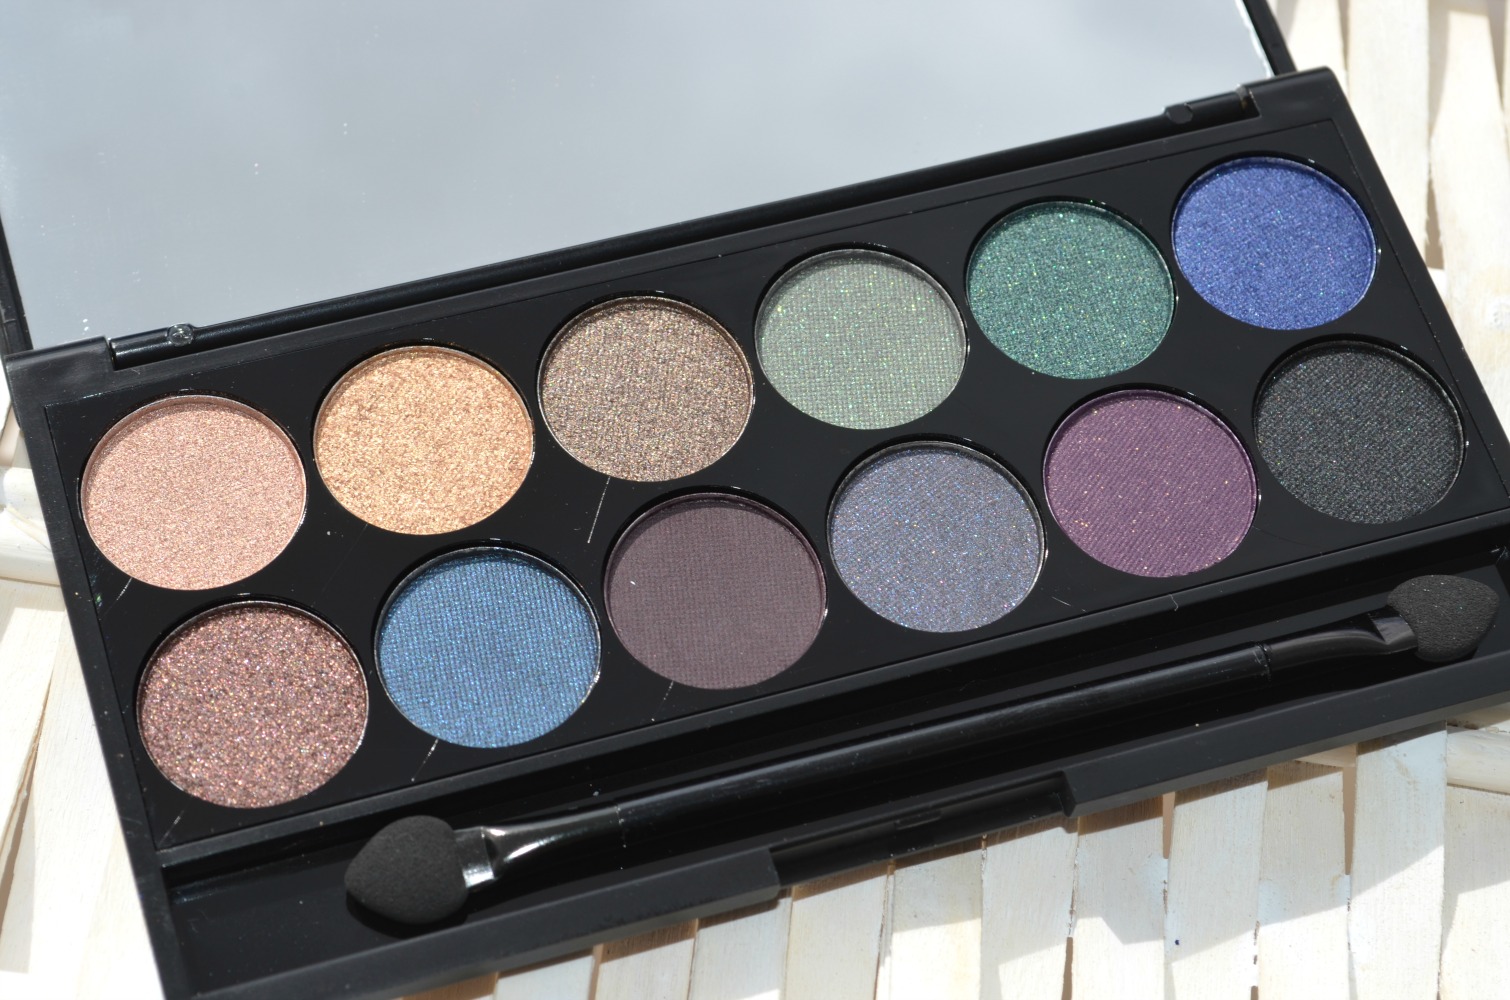 A closer look at the shades inside the eyeshadow palette